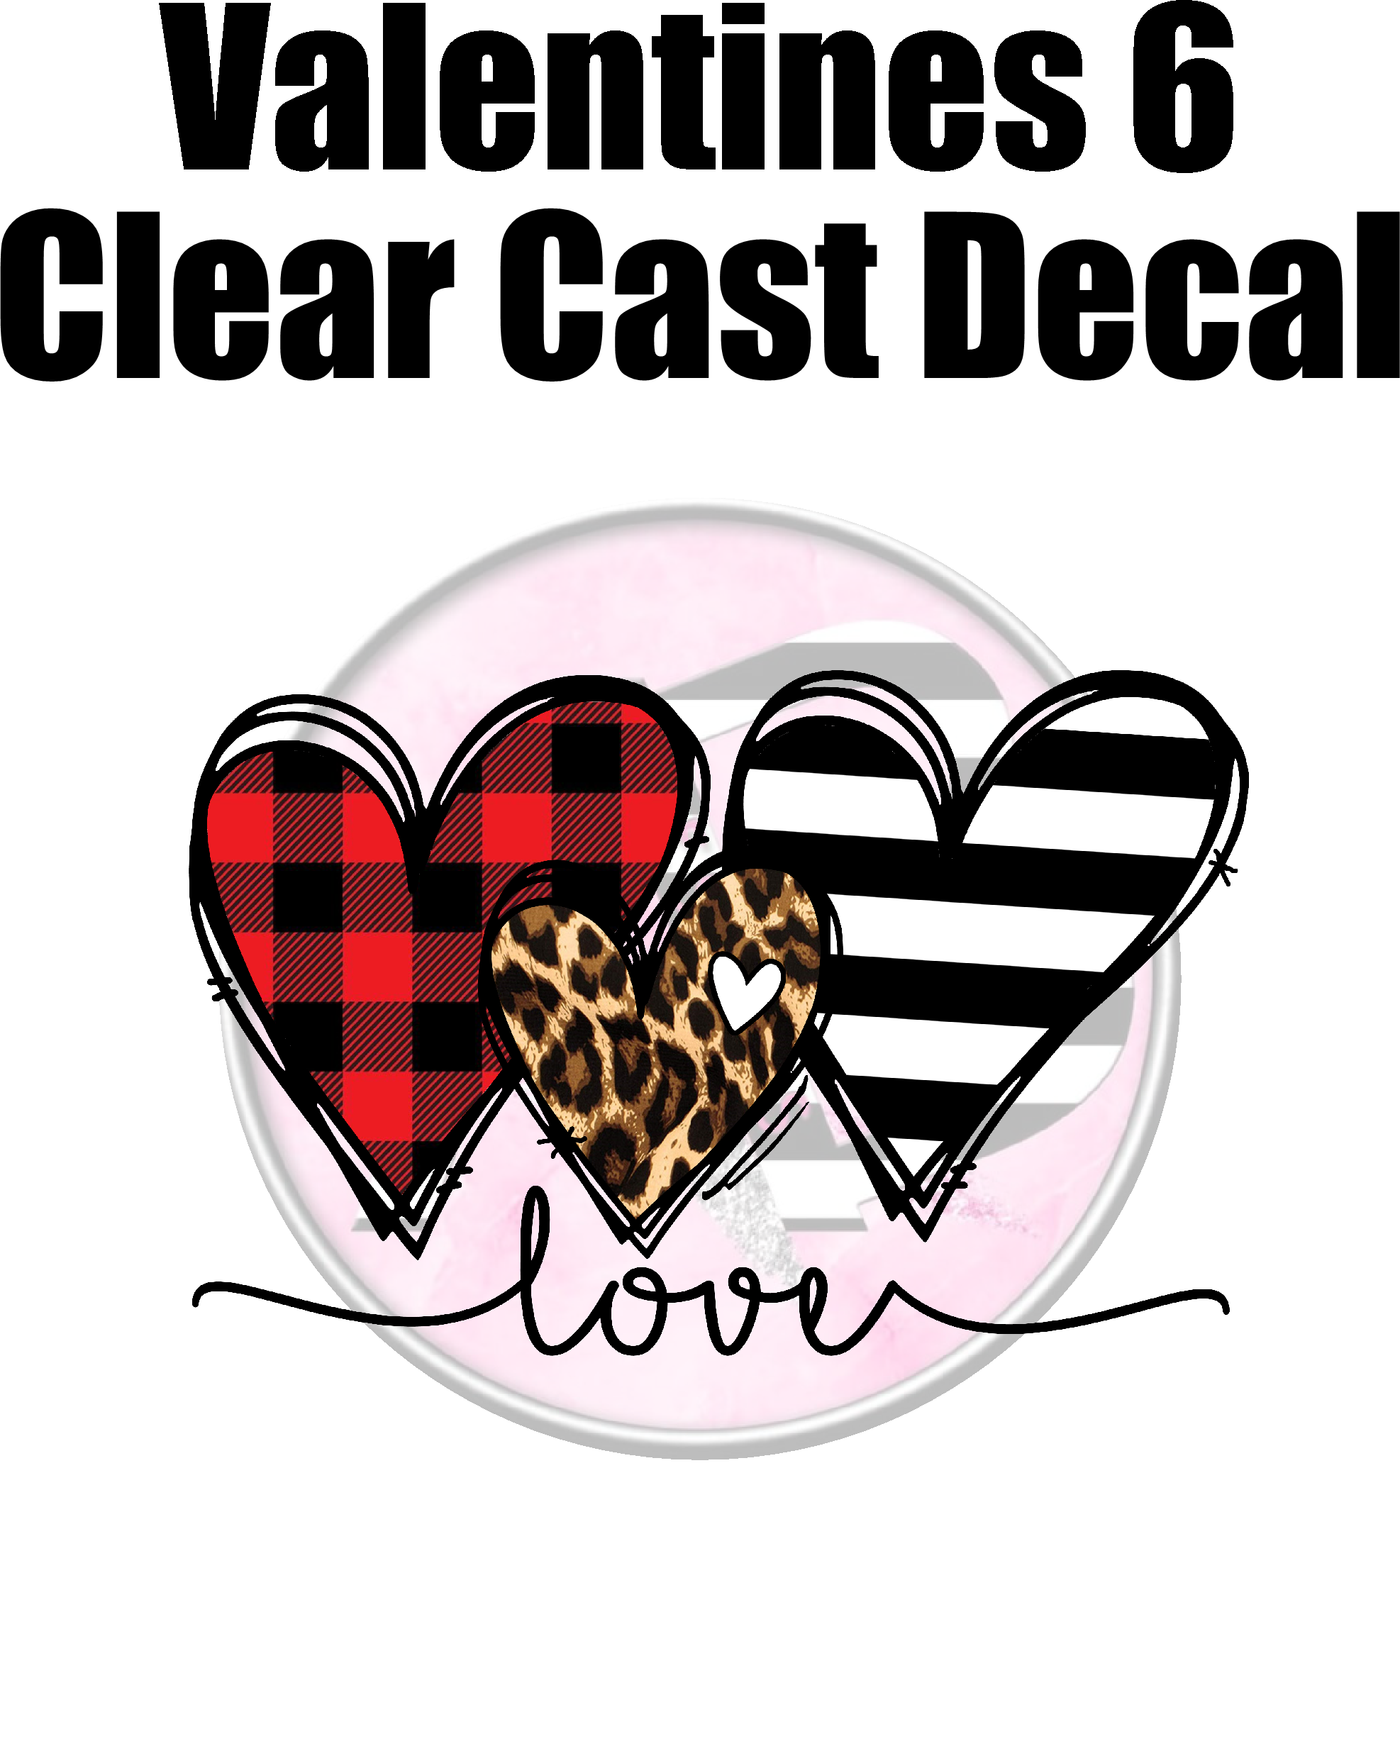 Valentines 6 - Clear Cast Decal